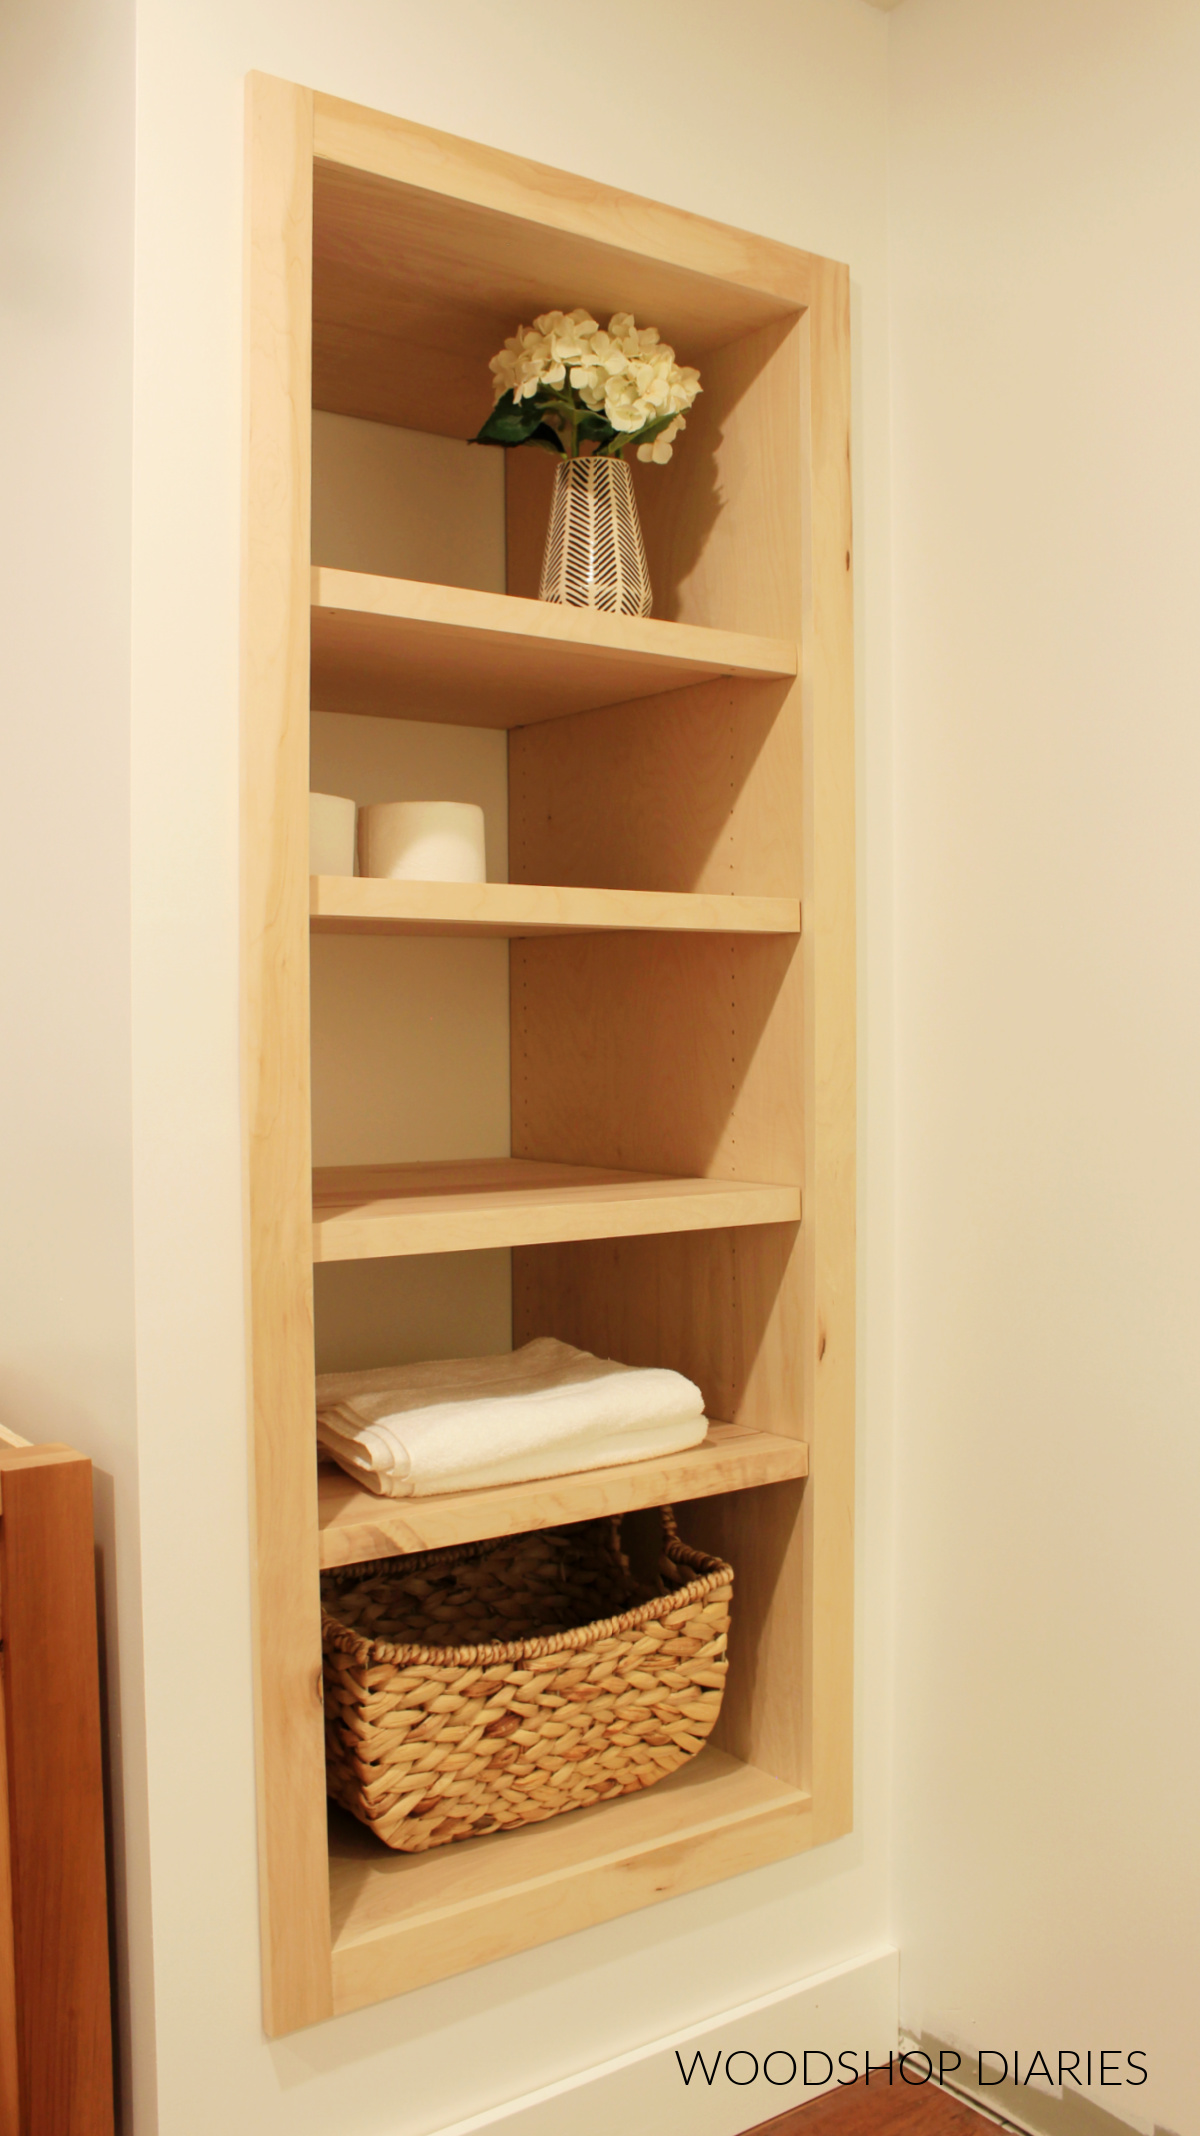 Built in cubby shelf complete with four shelves in bathroom closet opening